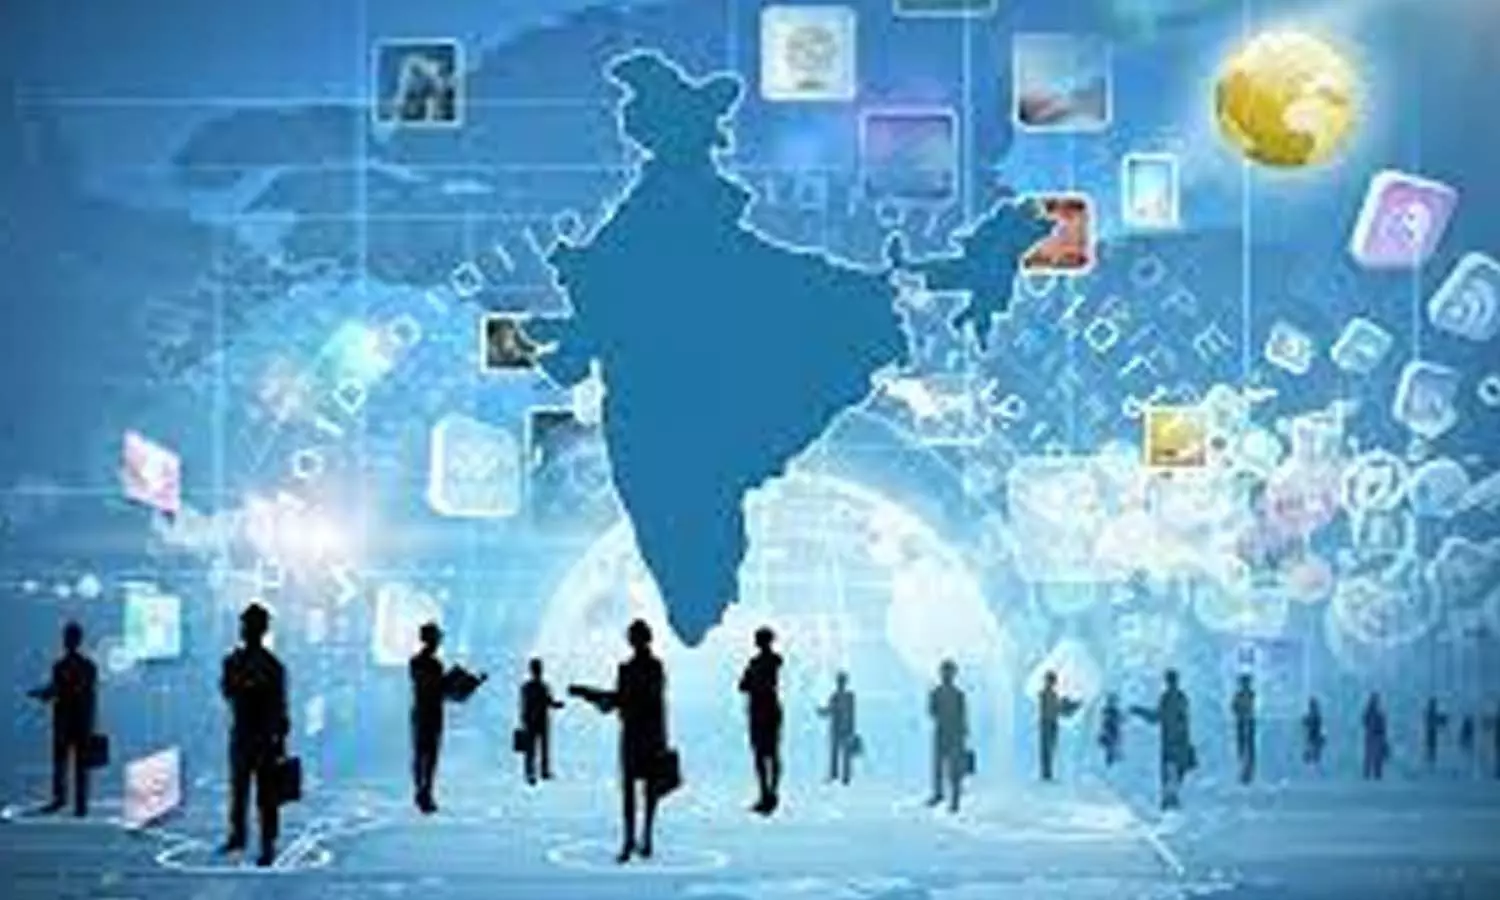 Digital India - Where knowledge is power